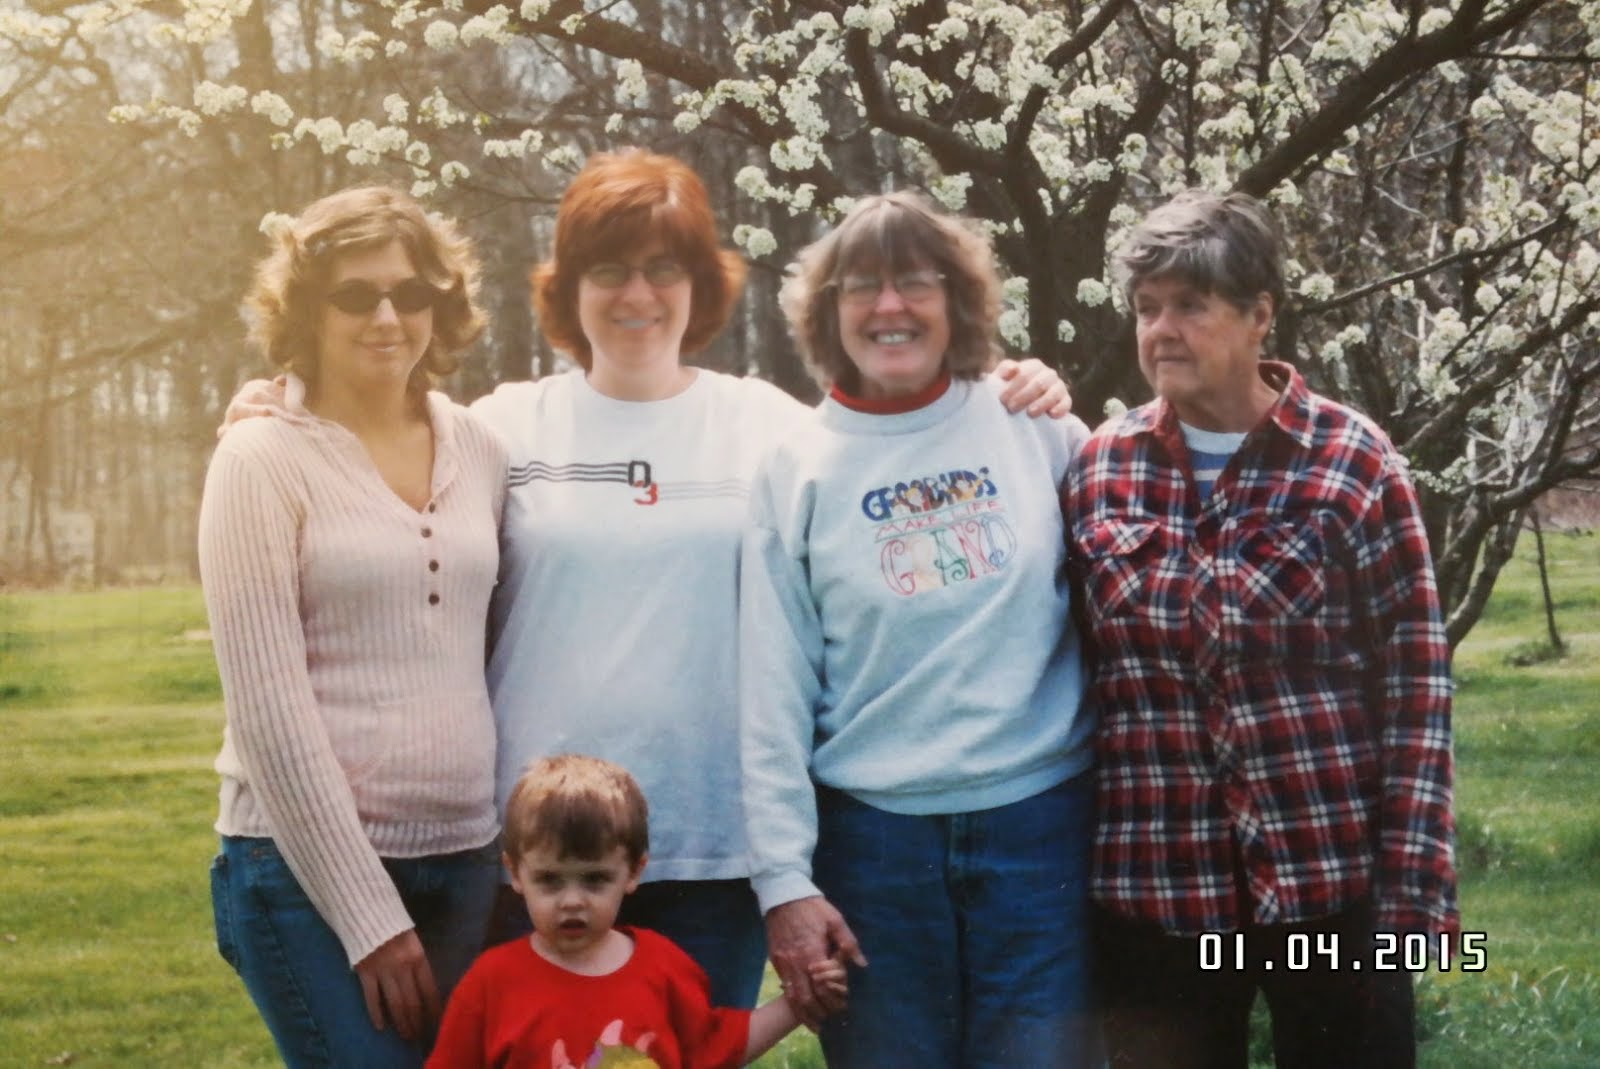 5 Generations - Aunt Dottie, Mom, Me, Jackie, and William